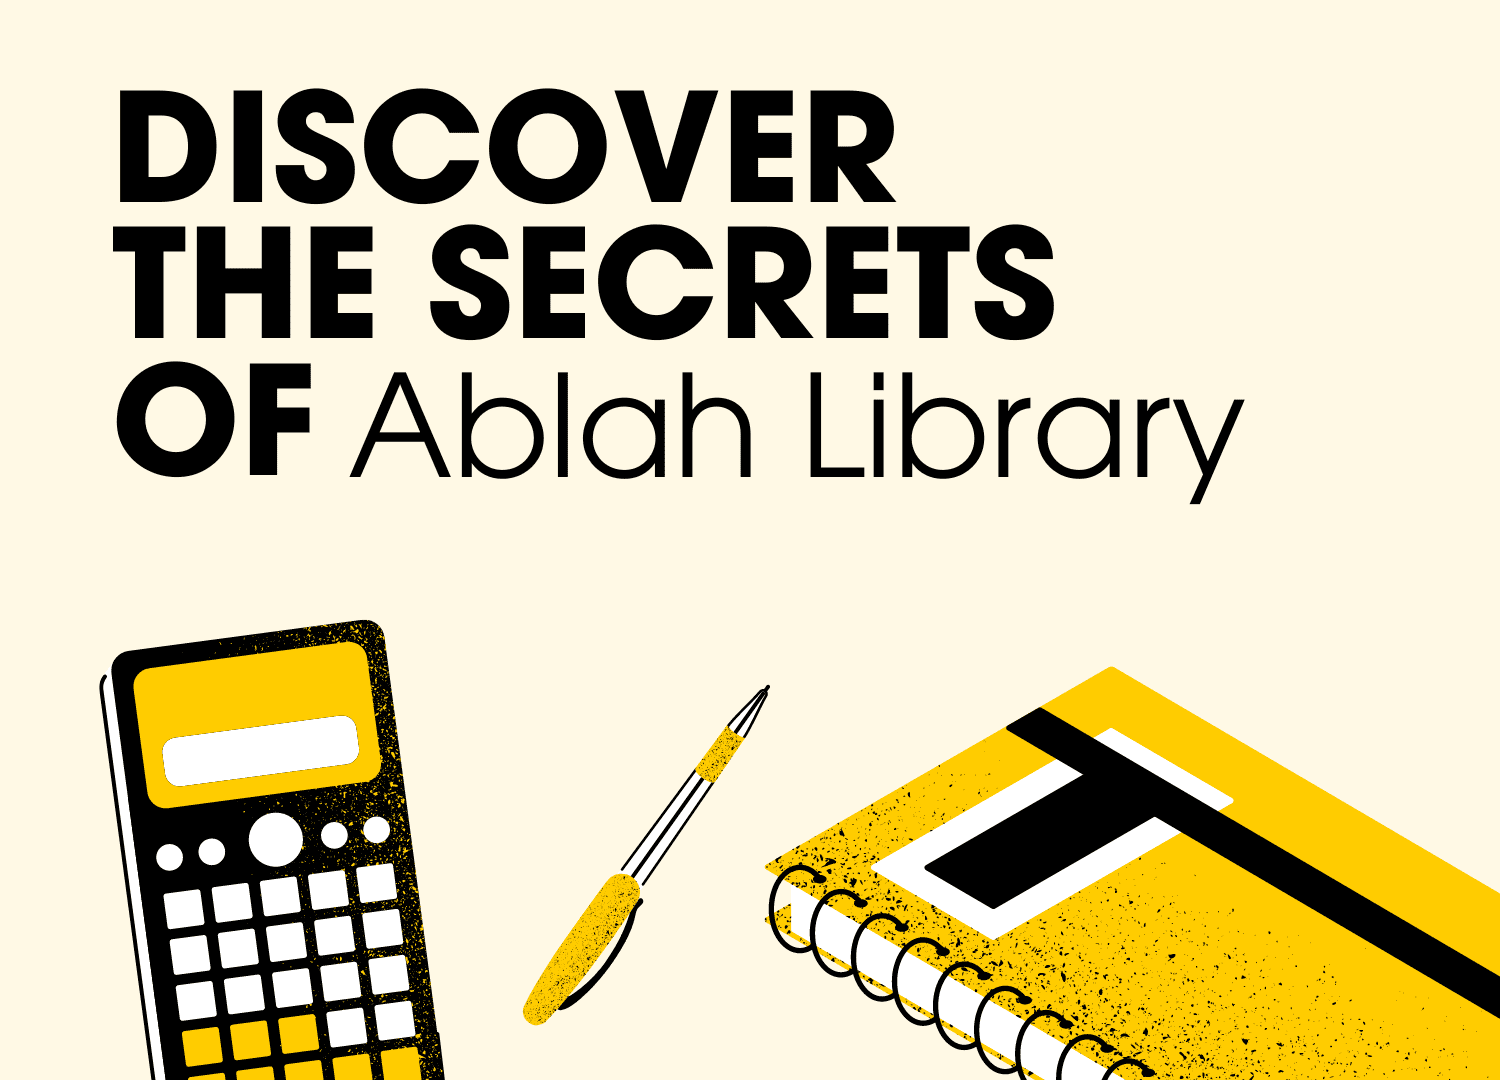 Discover the secrets of Ablah Library